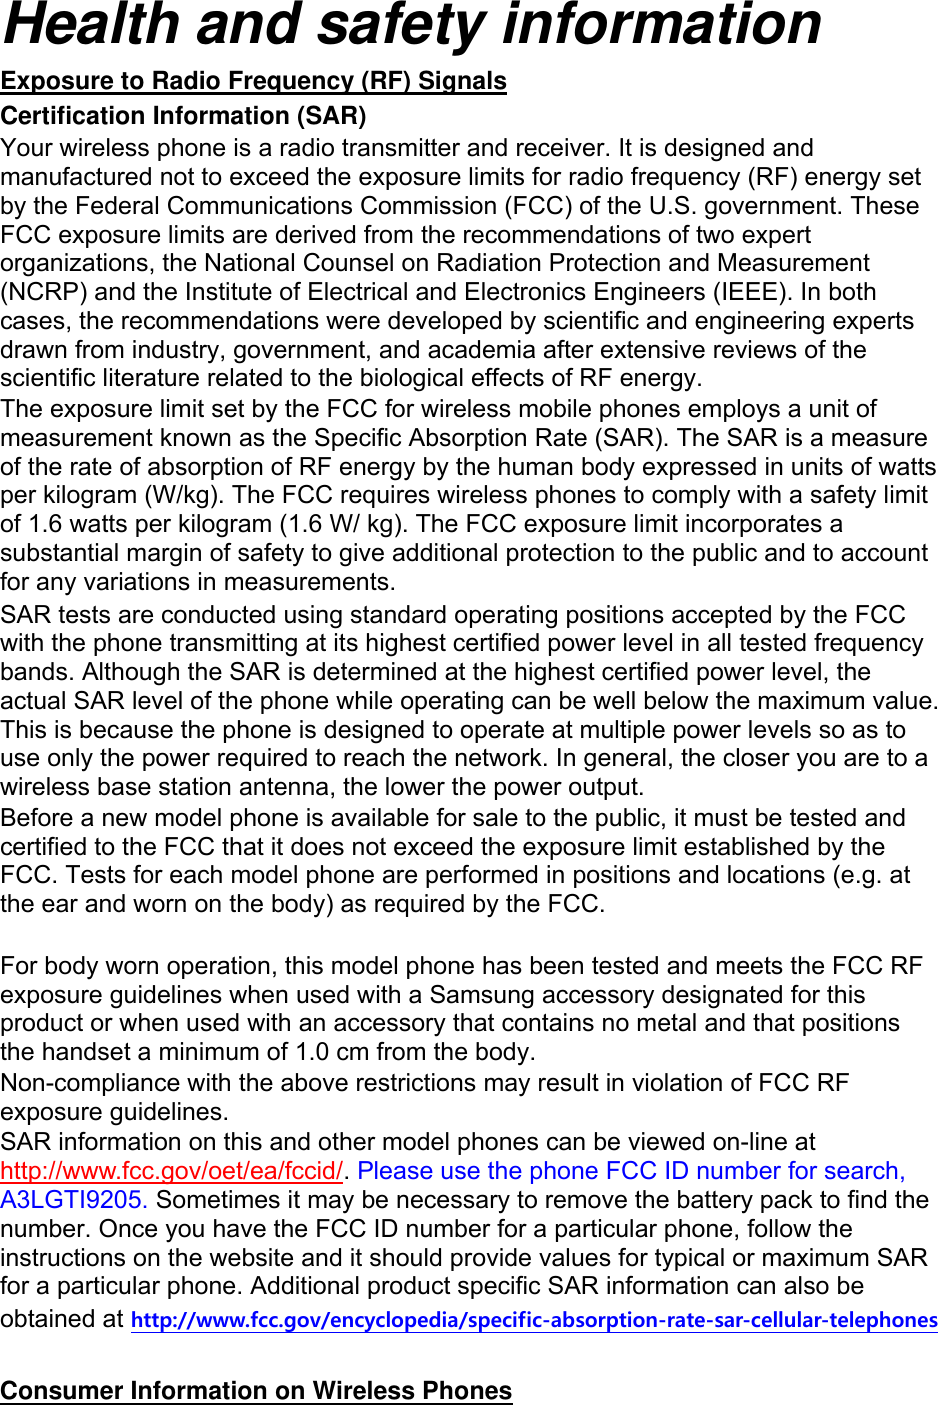 Health and safety information Exposure to Radio Frequency (RF) Signals Certification Information (SAR) Your wireless phone is a radio transmitter and receiver. It is designed and manufactured not to exceed the exposure limits for radio frequency (RF) energy set by the Federal Communications Commission (FCC) of the U.S. government. These FCC exposure limits are derived from the recommendations of two expert organizations, the National Counsel on Radiation Protection and Measurement (NCRP) and the Institute of Electrical and Electronics Engineers (IEEE). In both cases, the recommendations were developed by scientific and engineering experts drawn from industry, government, and academia after extensive reviews of the scientific literature related to the biological effects of RF energy. The exposure limit set by the FCC for wireless mobile phones employs a unit of measurement known as the Specific Absorption Rate (SAR). The SAR is a measure of the rate of absorption of RF energy by the human body expressed in units of watts per kilogram (W/kg). The FCC requires wireless phones to comply with a safety limit of 1.6 watts per kilogram (1.6 W/ kg). The FCC exposure limit incorporates a substantial margin of safety to give additional protection to the public and to account for any variations in measurements. SAR tests are conducted using standard operating positions accepted by the FCC with the phone transmitting at its highest certified power level in all tested frequency bands. Although the SAR is determined at the highest certified power level, the actual SAR level of the phone while operating can be well below the maximum value. This is because the phone is designed to operate at multiple power levels so as to use only the power required to reach the network. In general, the closer you are to a wireless base station antenna, the lower the power output. Before a new model phone is available for sale to the public, it must be tested and certified to the FCC that it does not exceed the exposure limit established by the FCC. Tests for each model phone are performed in positions and locations (e.g. at the ear and worn on the body) as required by the FCC.      For body worn operation, this model phone has been tested and meets the FCC RF exposure guidelines when used with a Samsung accessory designated for this product or when used with an accessory that contains no metal and that positions the handset a minimum of 1.0 cm from the body.   Non-compliance with the above restrictions may result in violation of FCC RF exposure guidelines. SAR information on this and other model phones can be viewed on-line at http://www.fcc.gov/oet/ea/fccid/. Please use the phone FCC ID number for search, A3LGTI9205. Sometimes it may be necessary to remove the battery pack to find the number. Once you have the FCC ID number for a particular phone, follow the instructions on the website and it should provide values for typical or maximum SAR for a particular phone. Additional product specific SAR information can also be obtained at http://www.fcc.gov/encyclopedia/specific-absorption-rate-sar-cellular-telephones  Consumer Information on Wireless Phones 